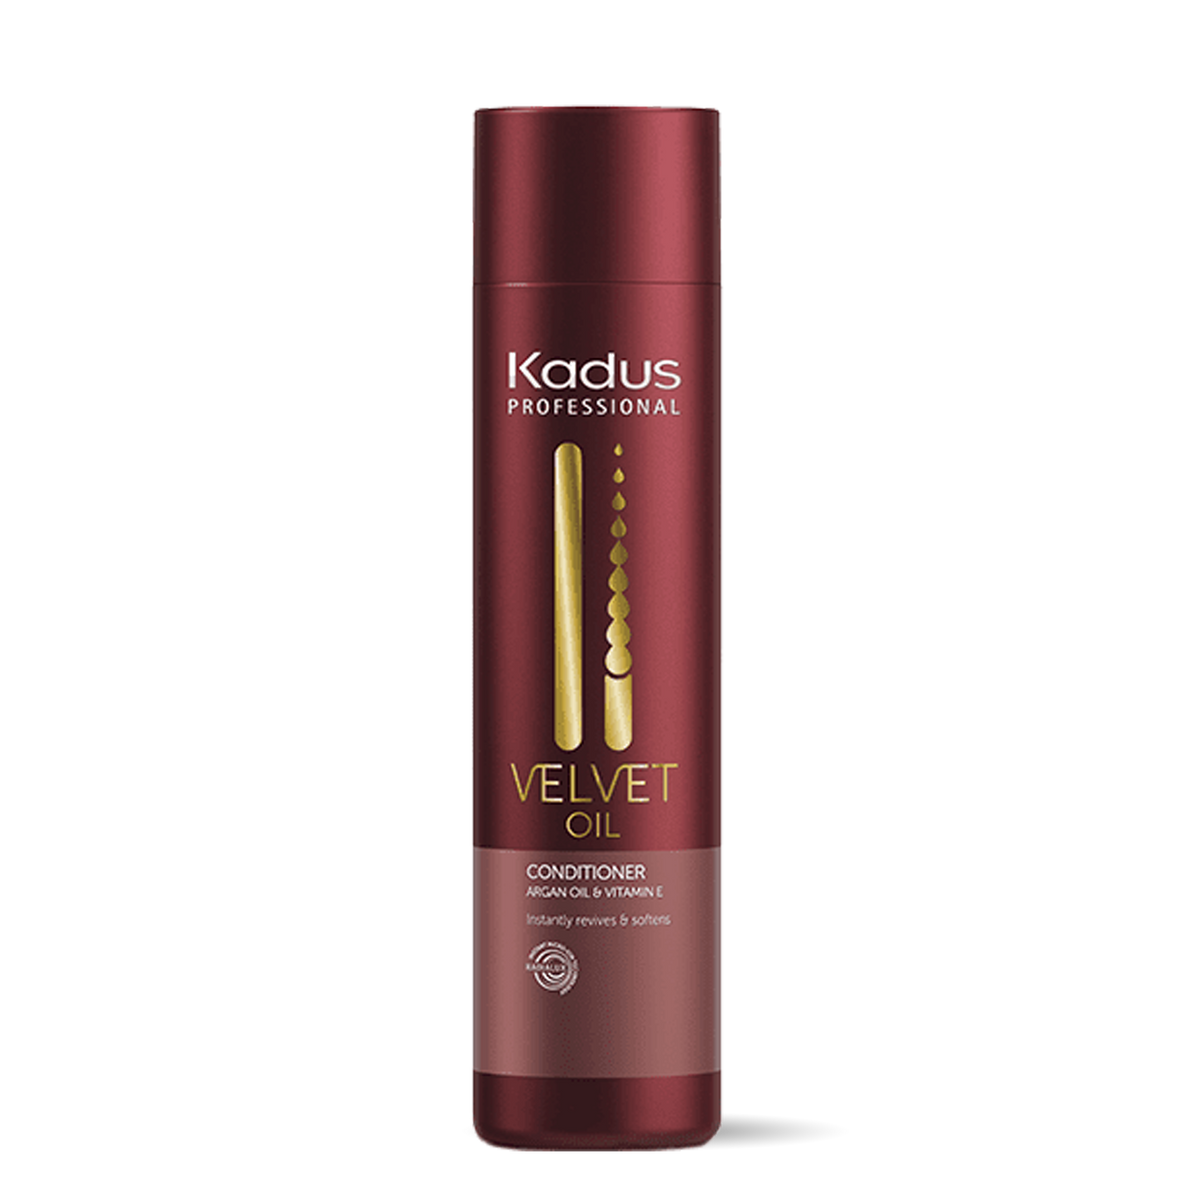 Kadus Velvet Oil Conditioner 250ml - by Kadus Professionals |ProCare Outlet|